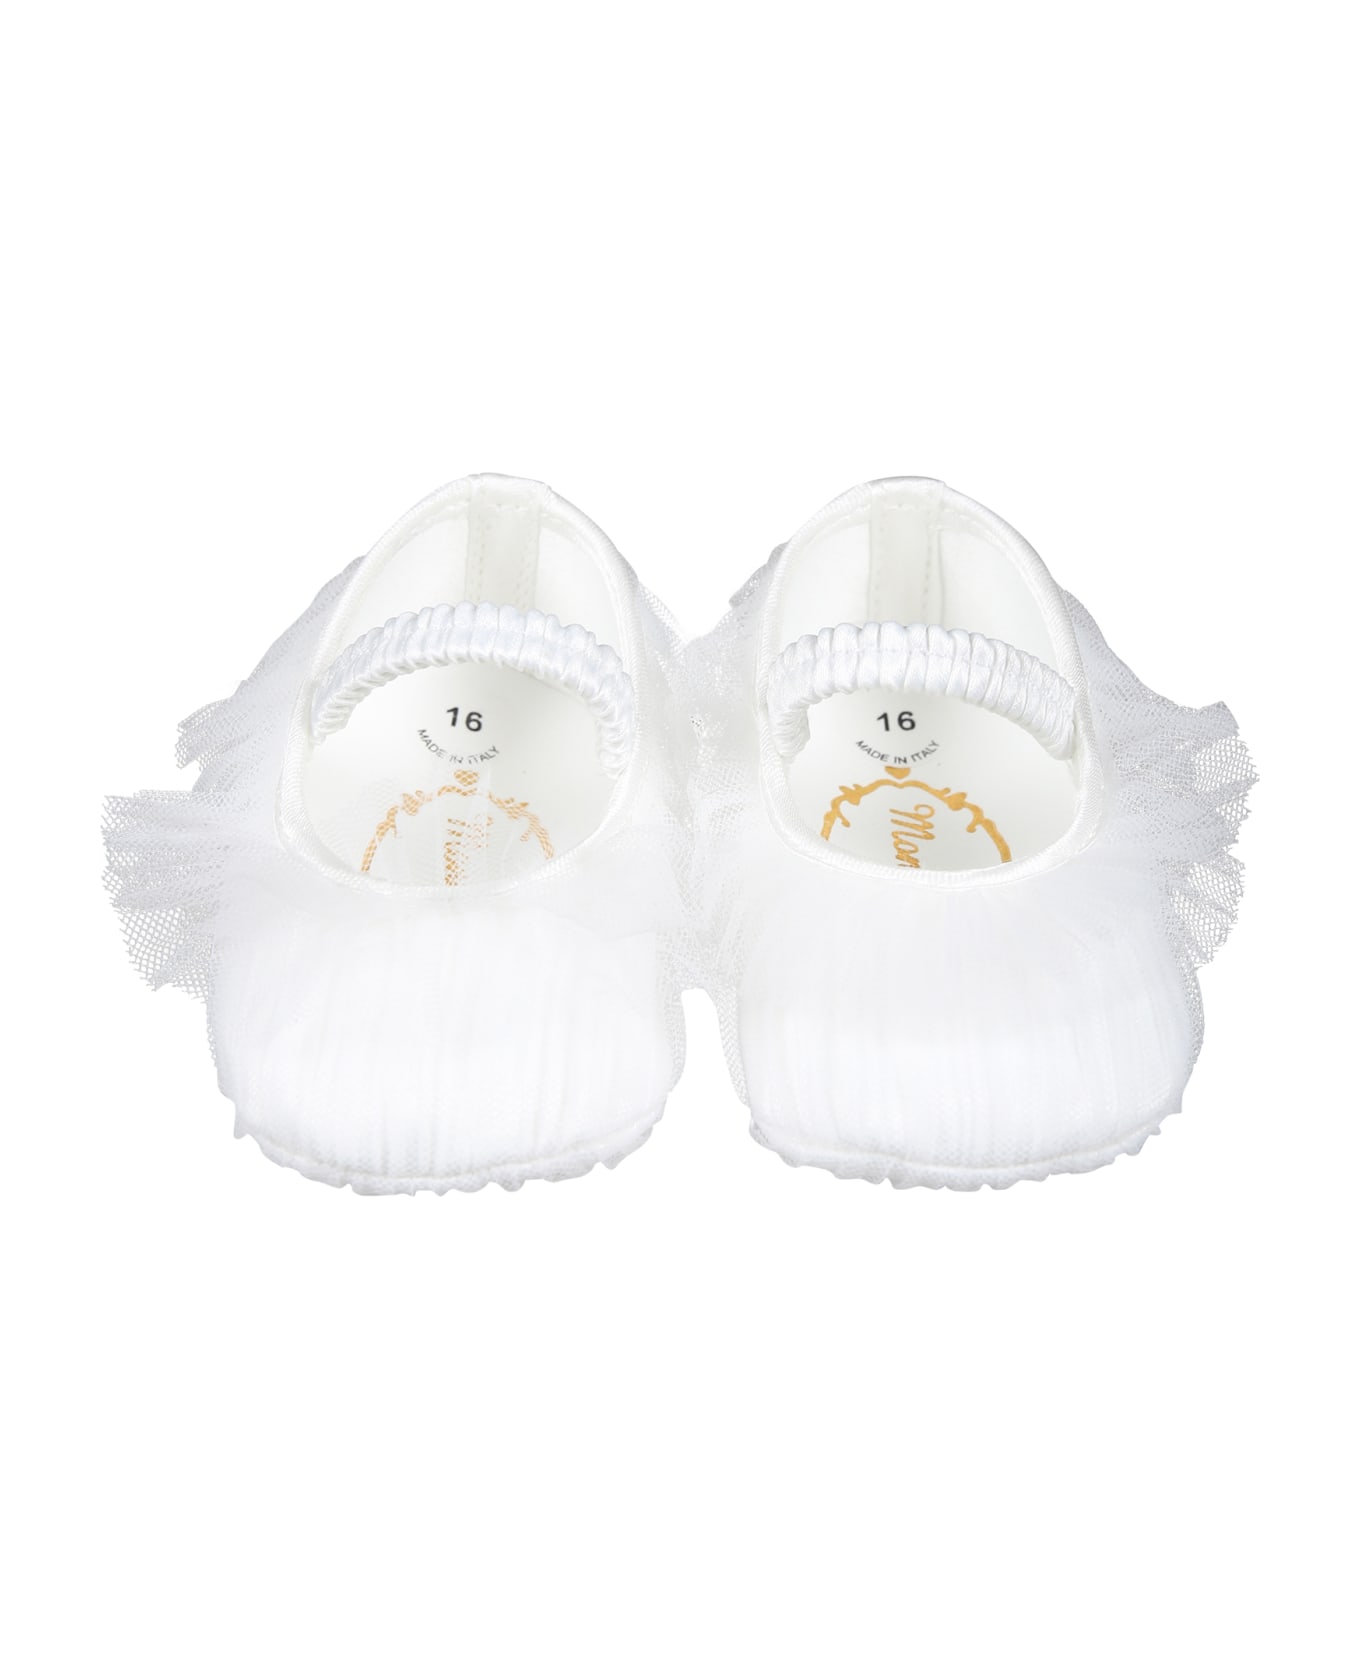 Monnalisa White Flat Shoes For Baby Girl With Tulle Bow - White シューズ